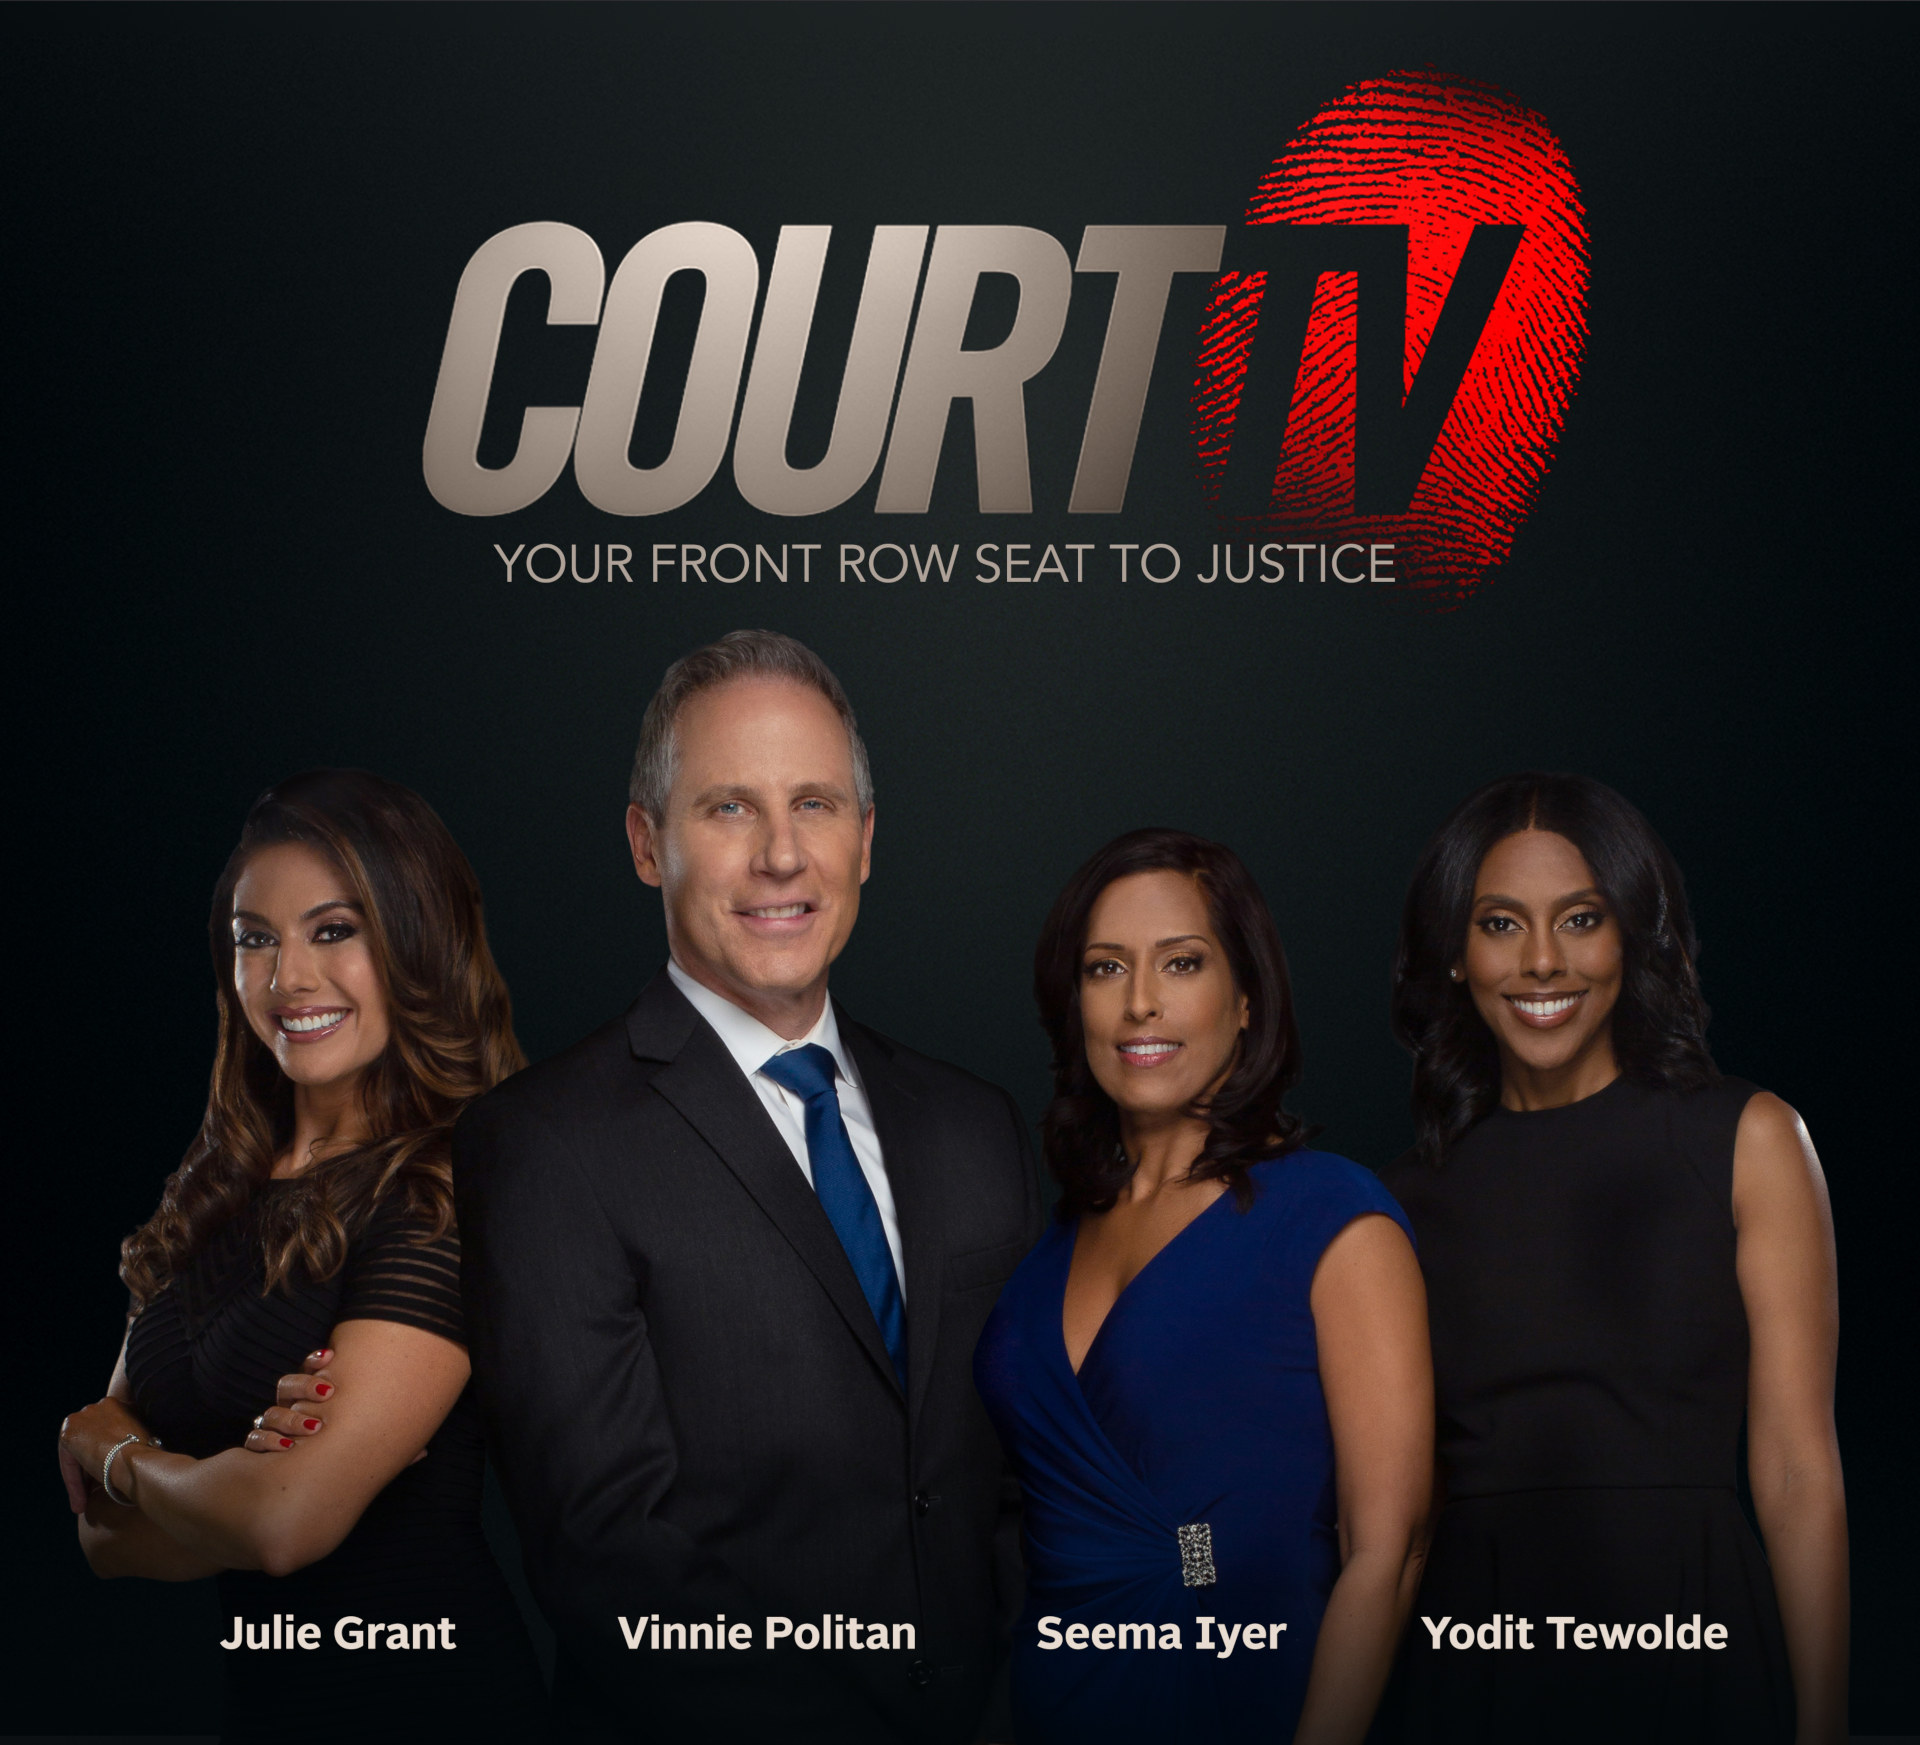 Yodit Tewolde Joins Politan yer and Grant as New Court TV Anchor Team